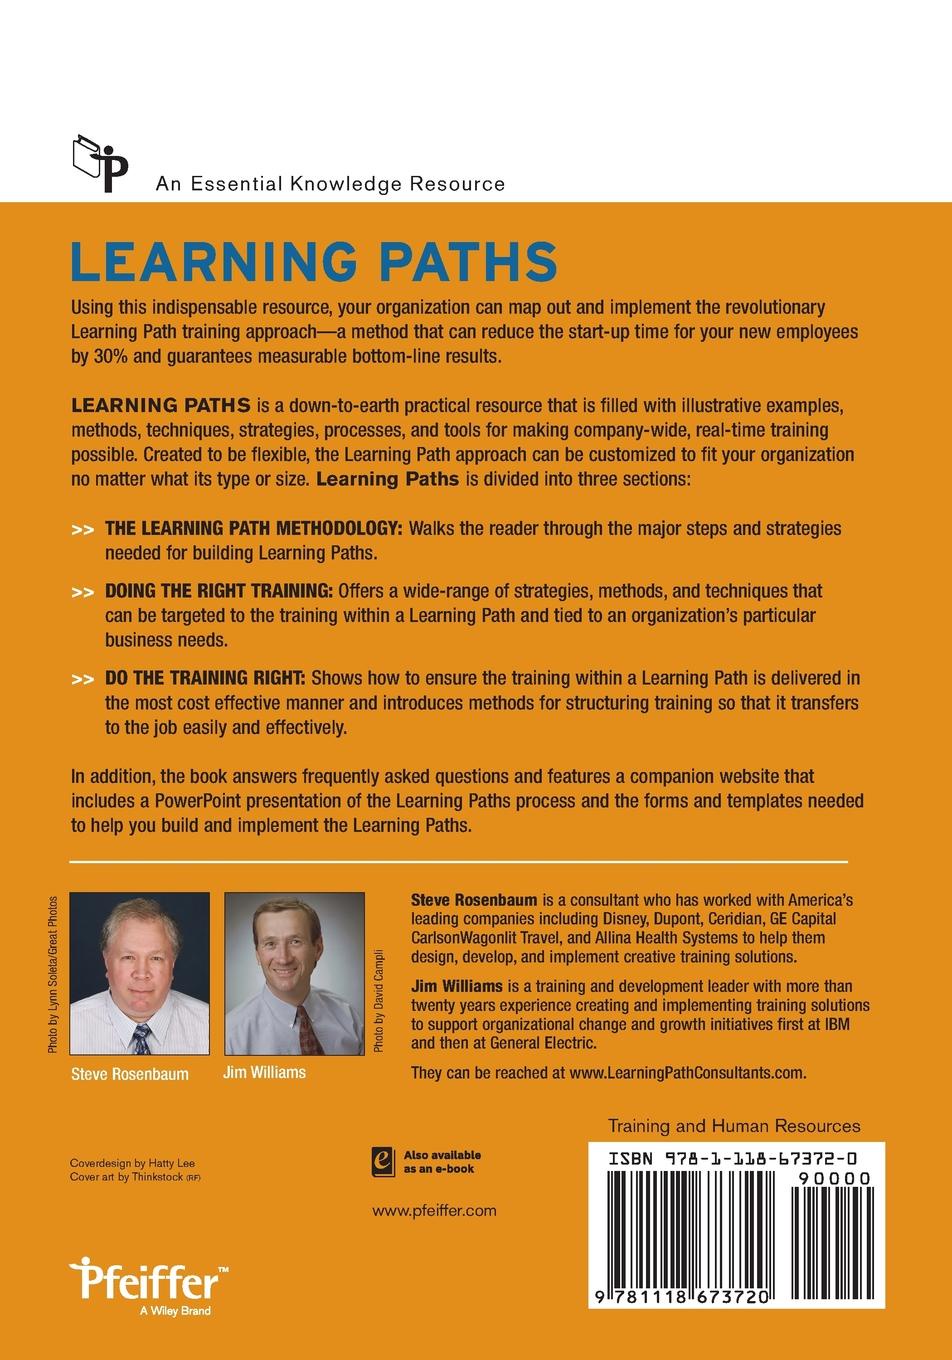 Learning Paths. Increase Profits by Reducing the Time It Takes for Employees to Get Up-To-Speed